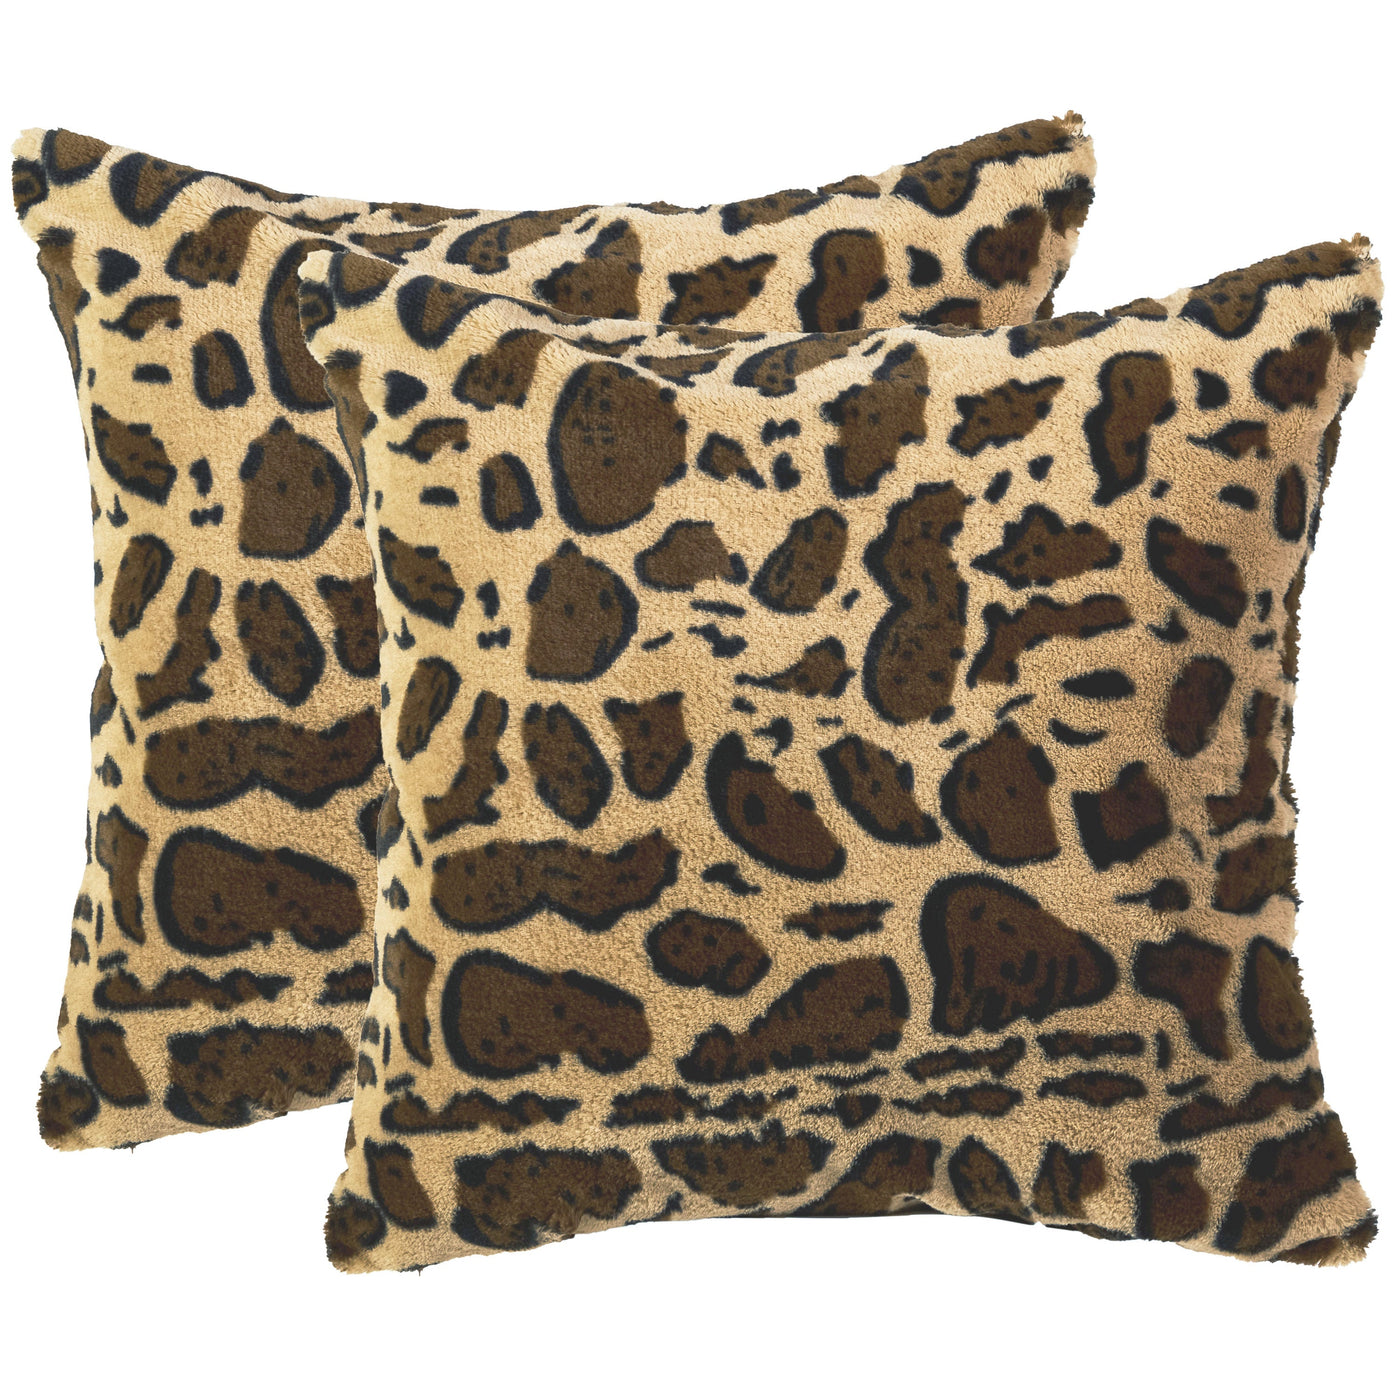 https://www.cheercollection.com/cdn/shop/products/cheer-collection-set-of-2-leopard-print-throw-pillows-soft-velvety-faux-fur-decorative-lumbar-couch-pillows-904625_1400x.jpg?v=1671778182